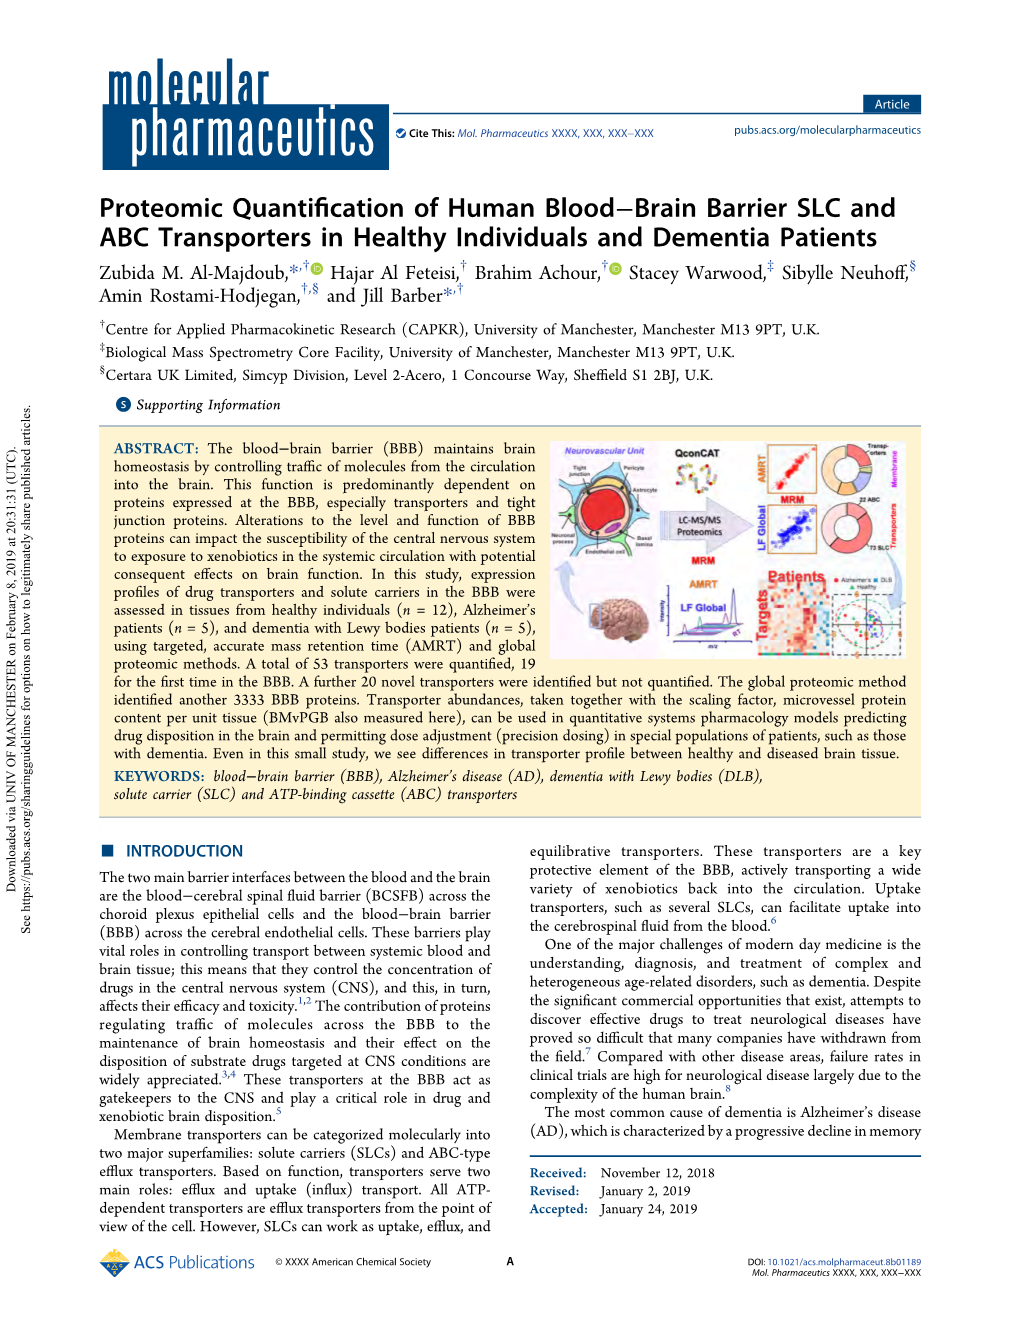 Proteomic Quantification of Human Blood–Brain Barrier SLC and ABC